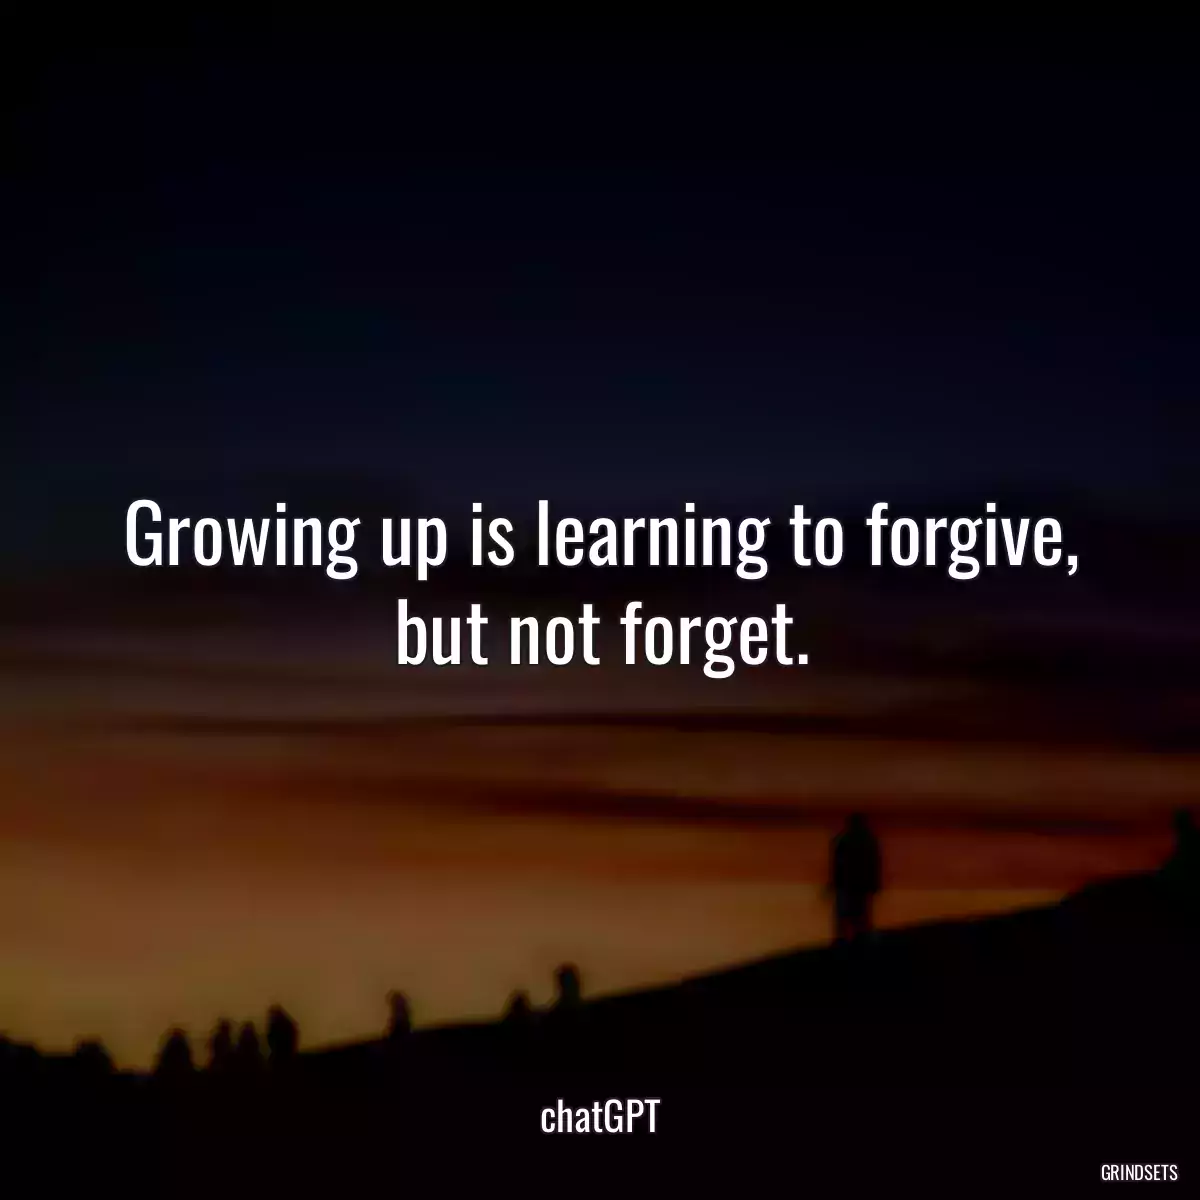 Growing up is learning to forgive, but not forget.